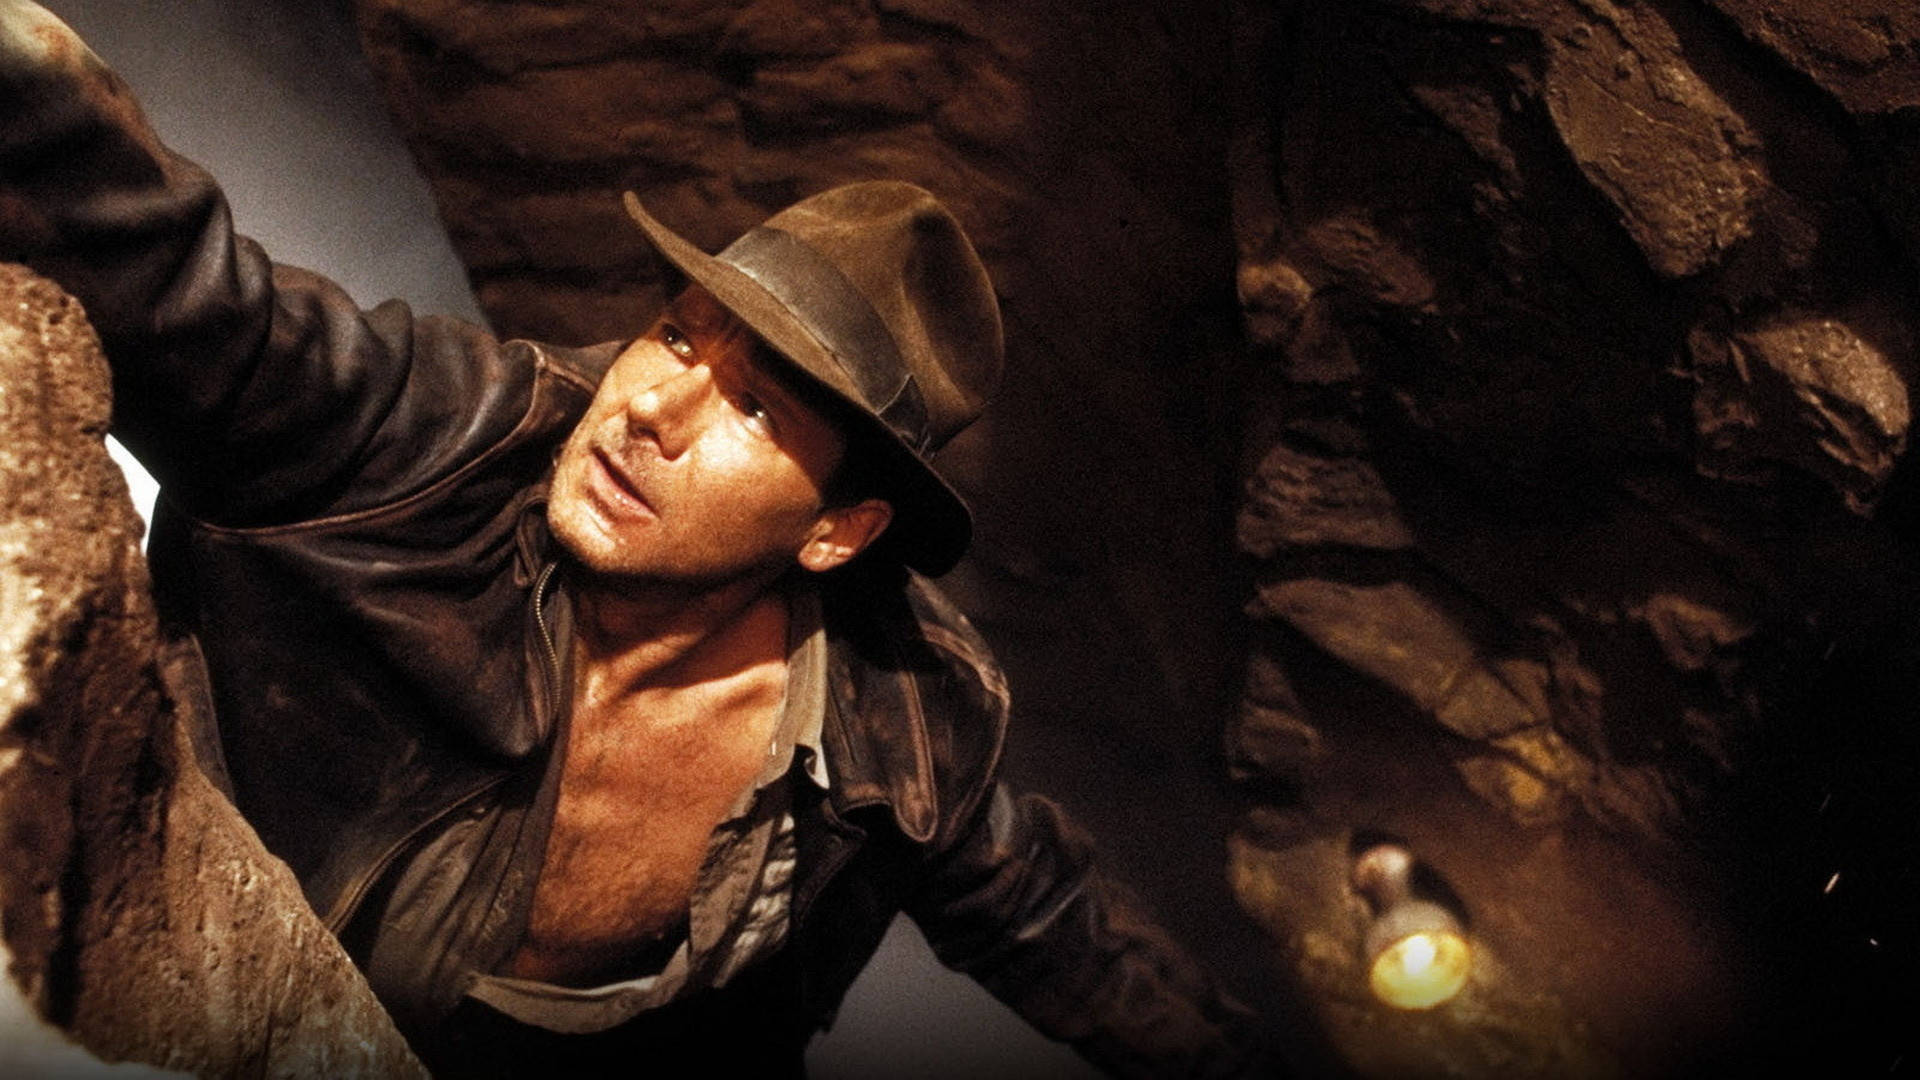 Harrison Ford as Indiana Jones on the Edge of a Cliff Wallpaper